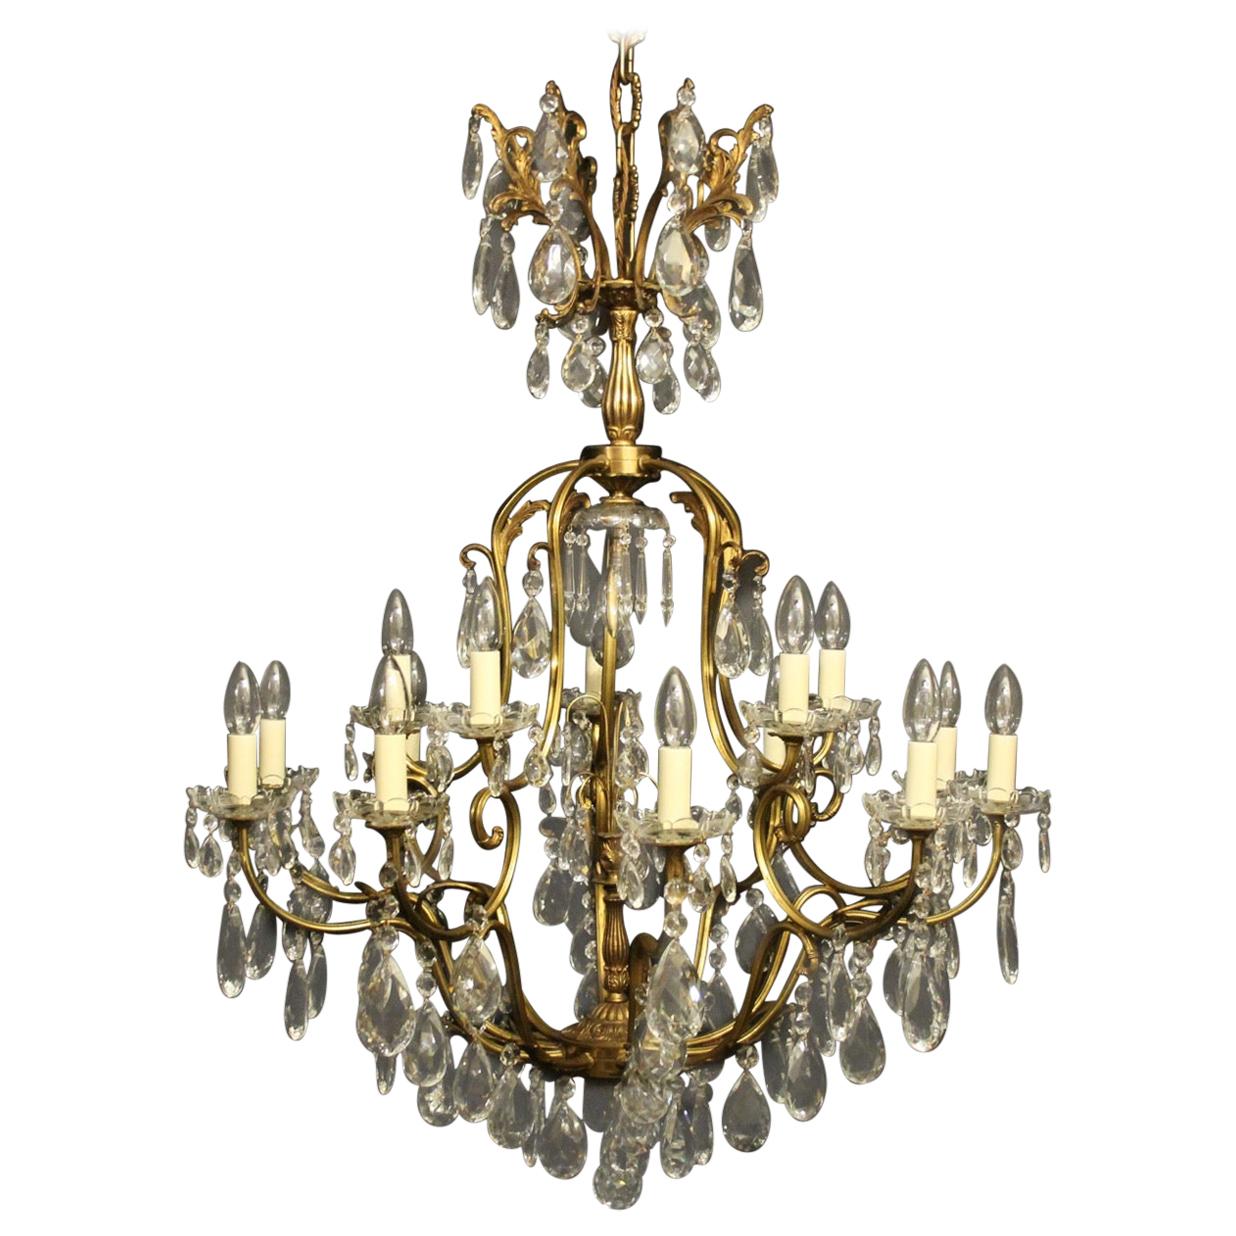 French Gilded Birdcage Antique Chandelier